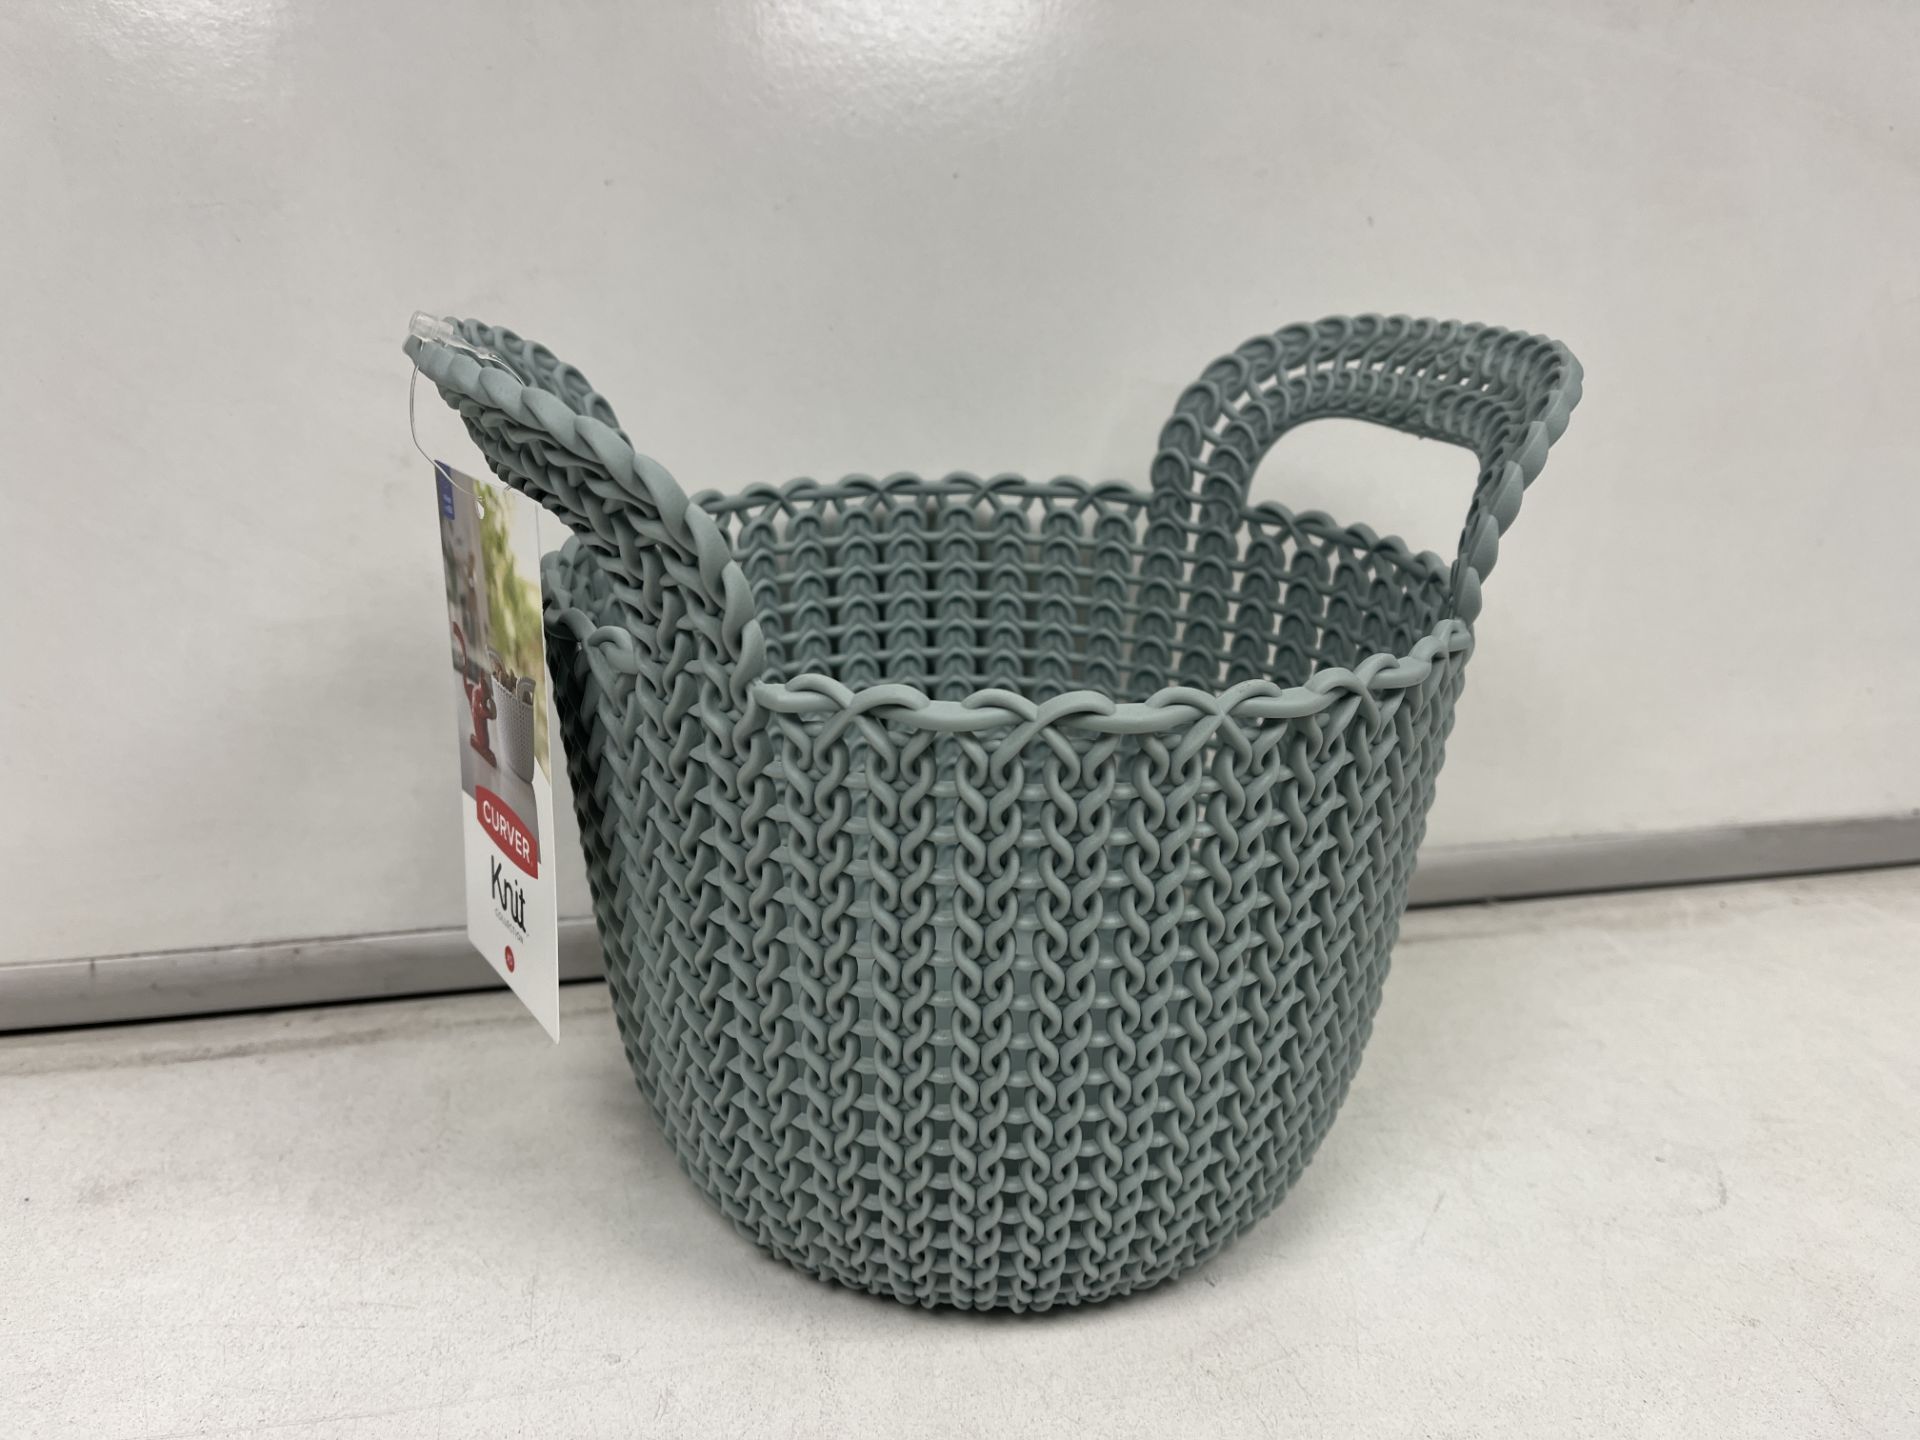 30 X NEW PACKAGED CURVER 226386 Decorative Basket Round Knitted Plastic Blue/Grey (226386ROW9)